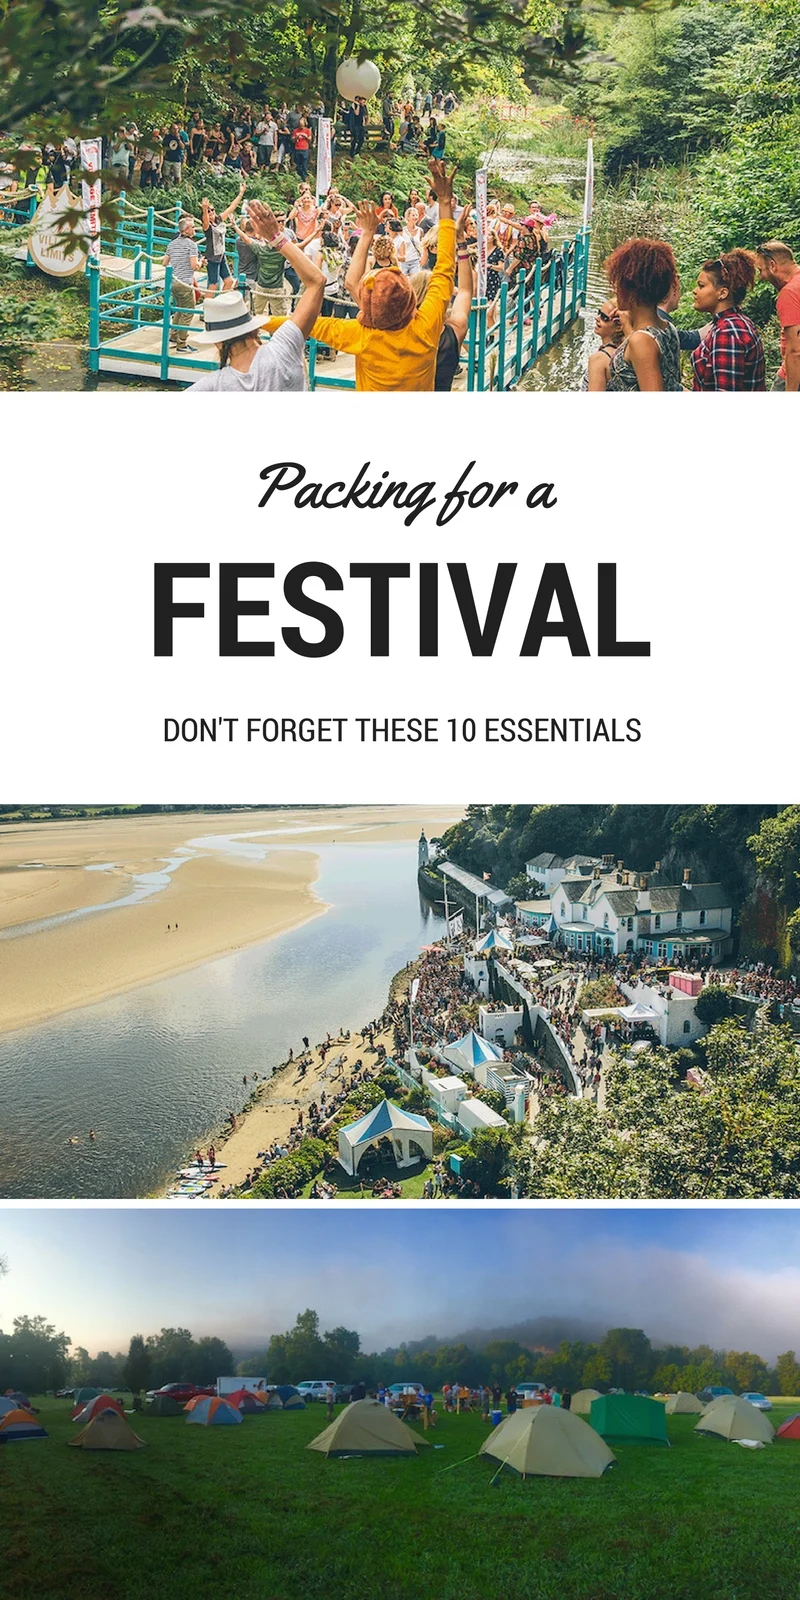 Festival Packing List - Essential Items